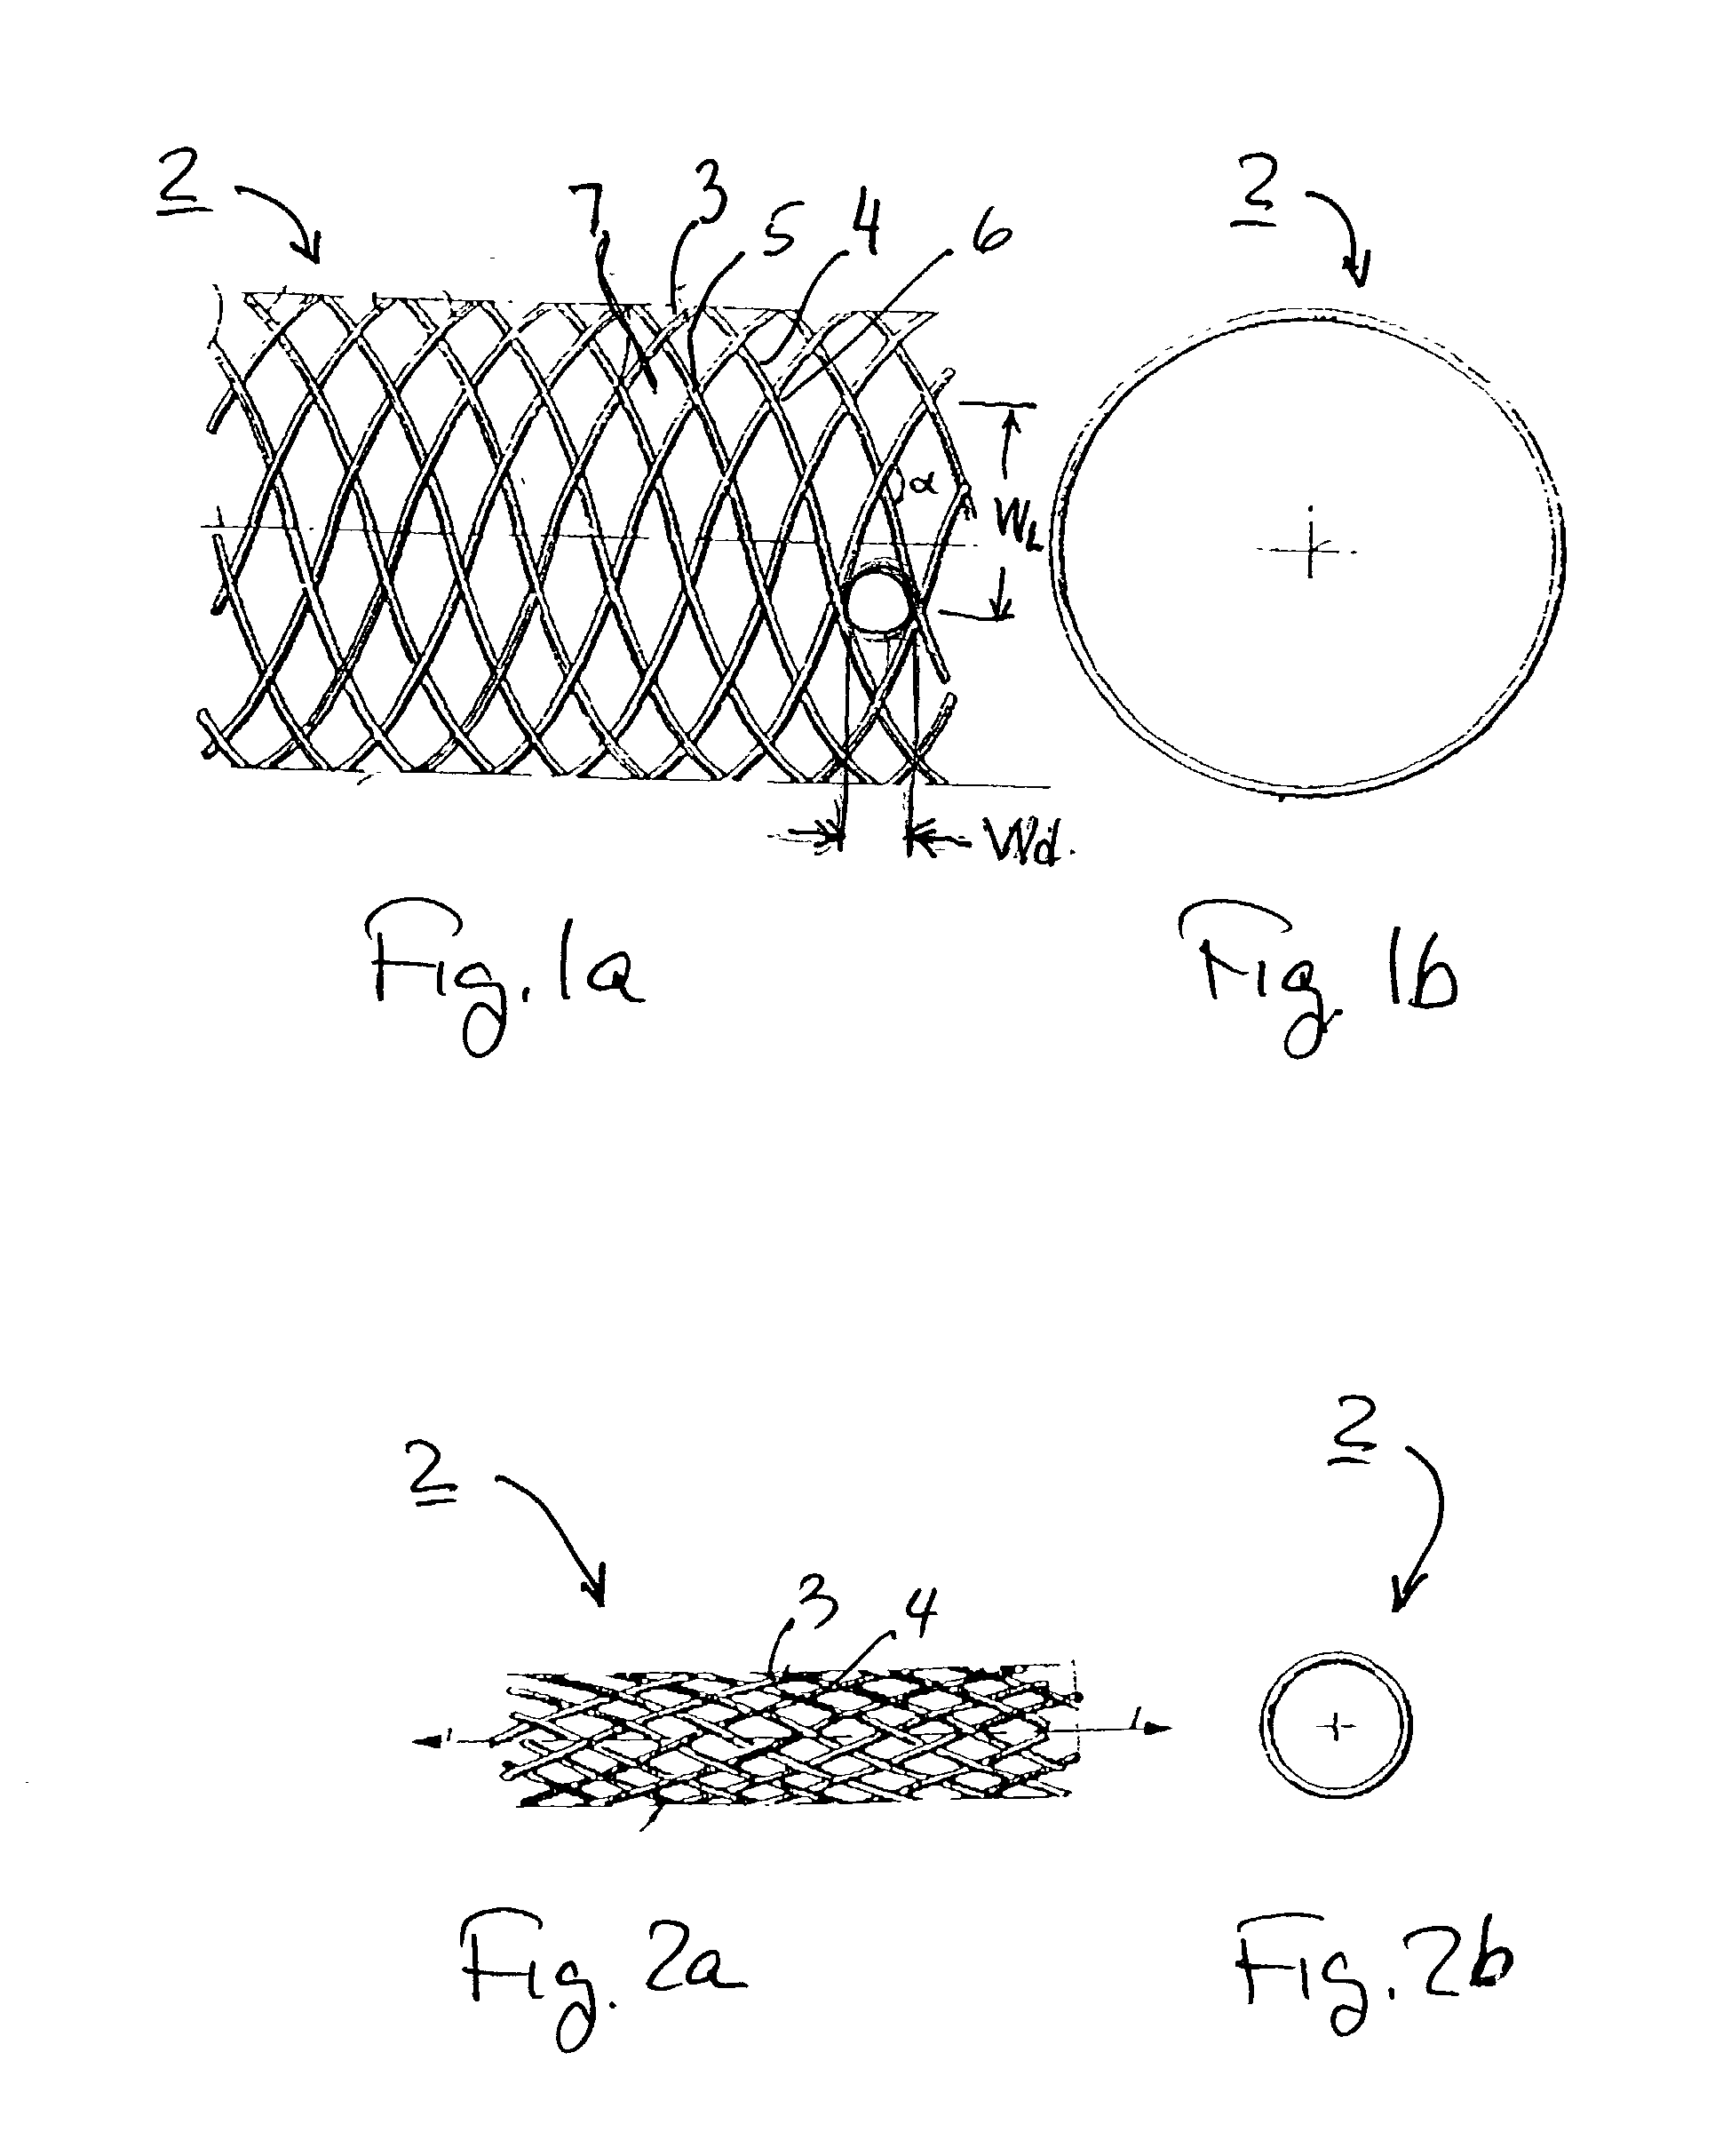 Implantable intraluminal device and method of using same in treating aneurysms